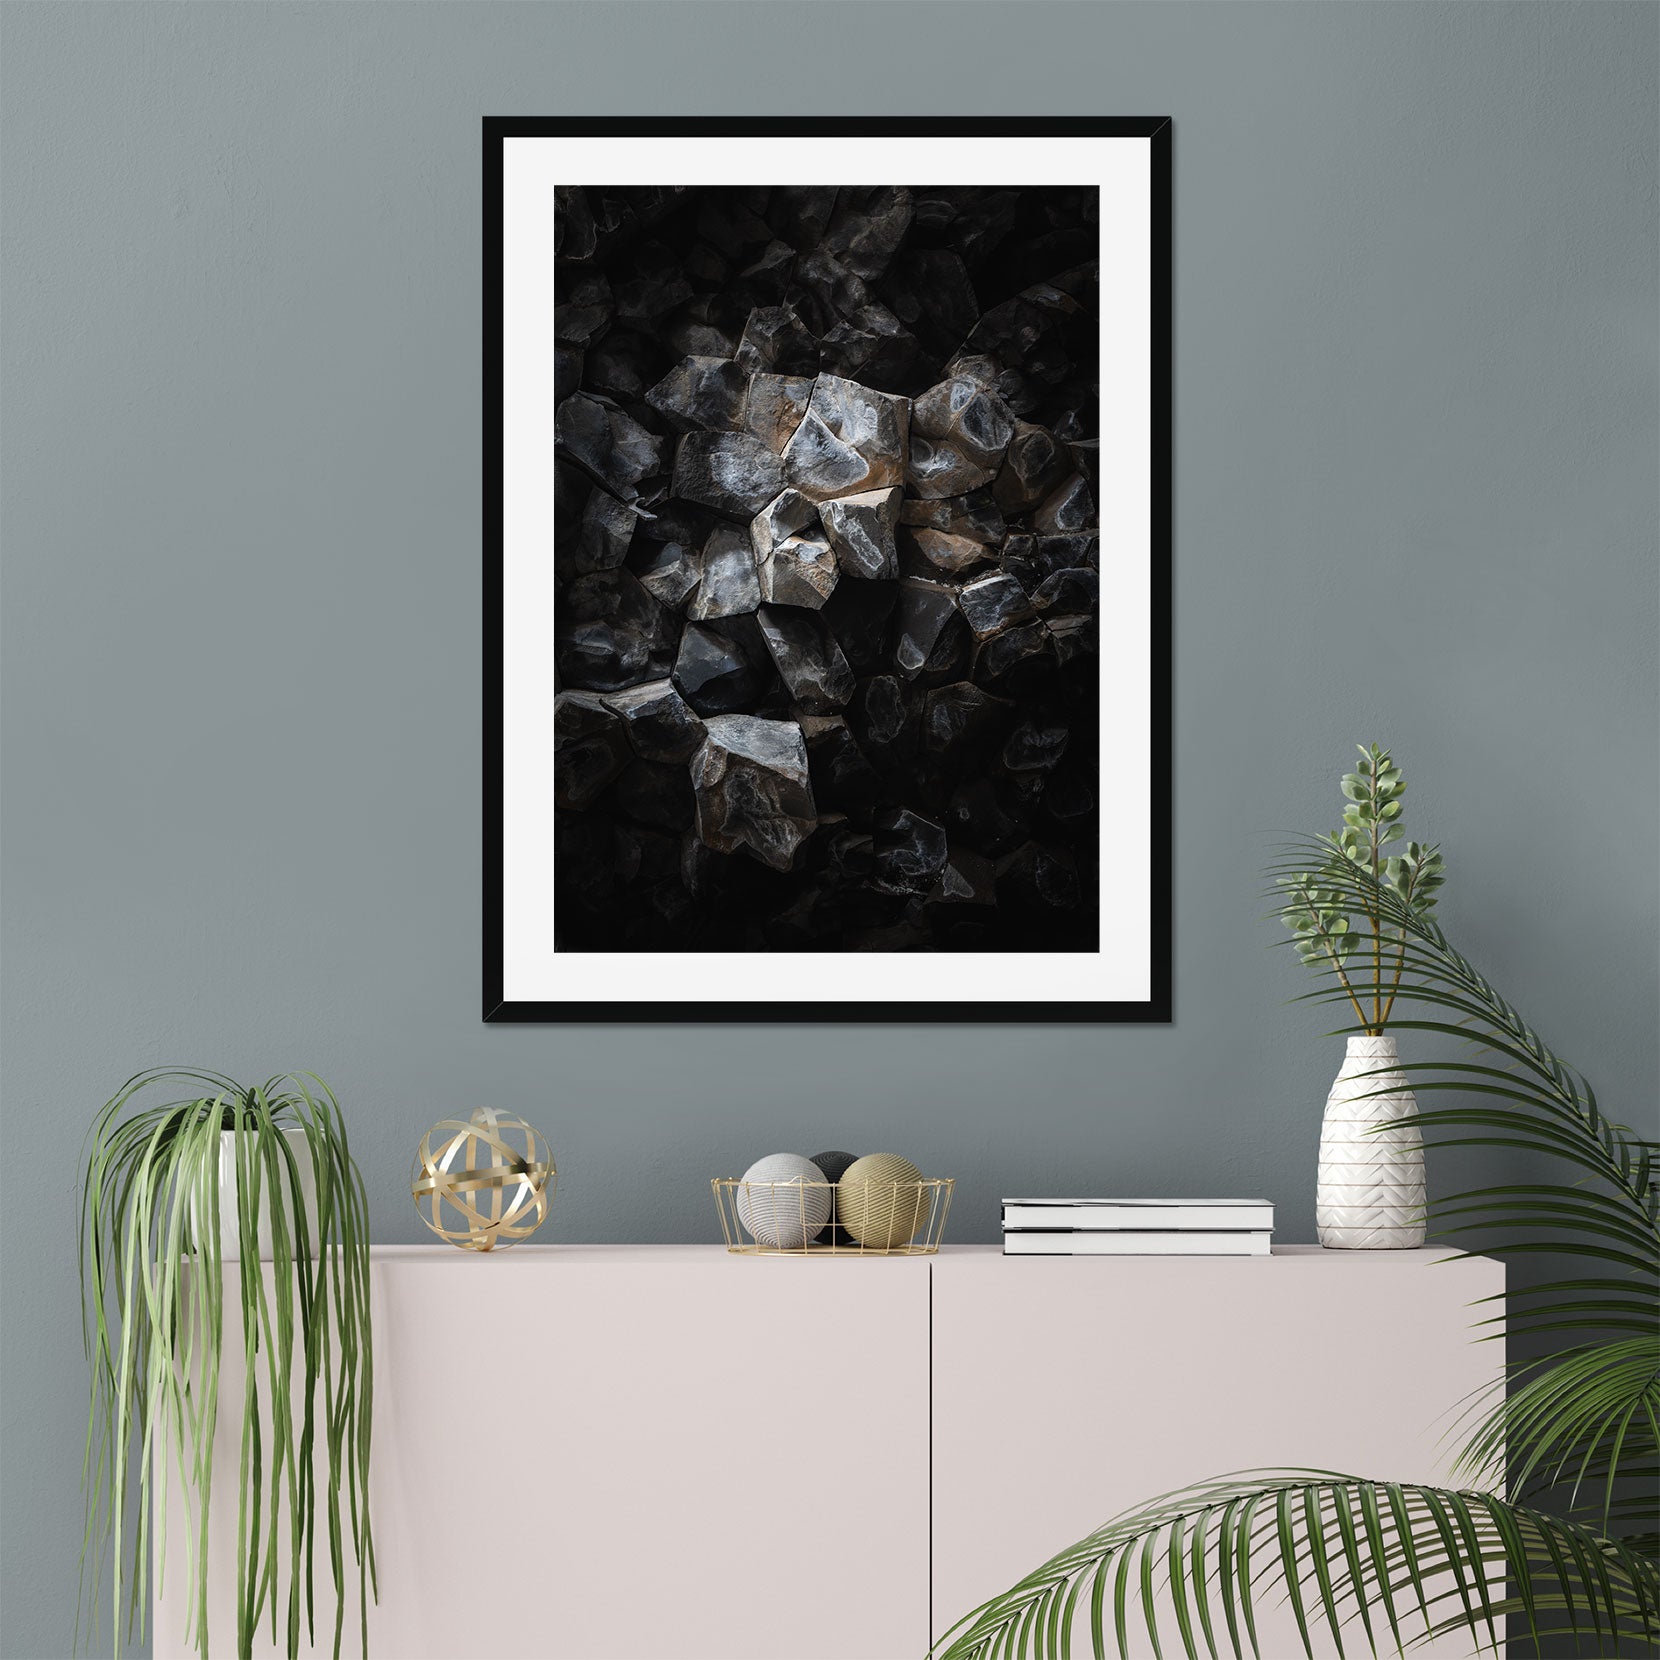 A framed print of a detail from a basalt cave